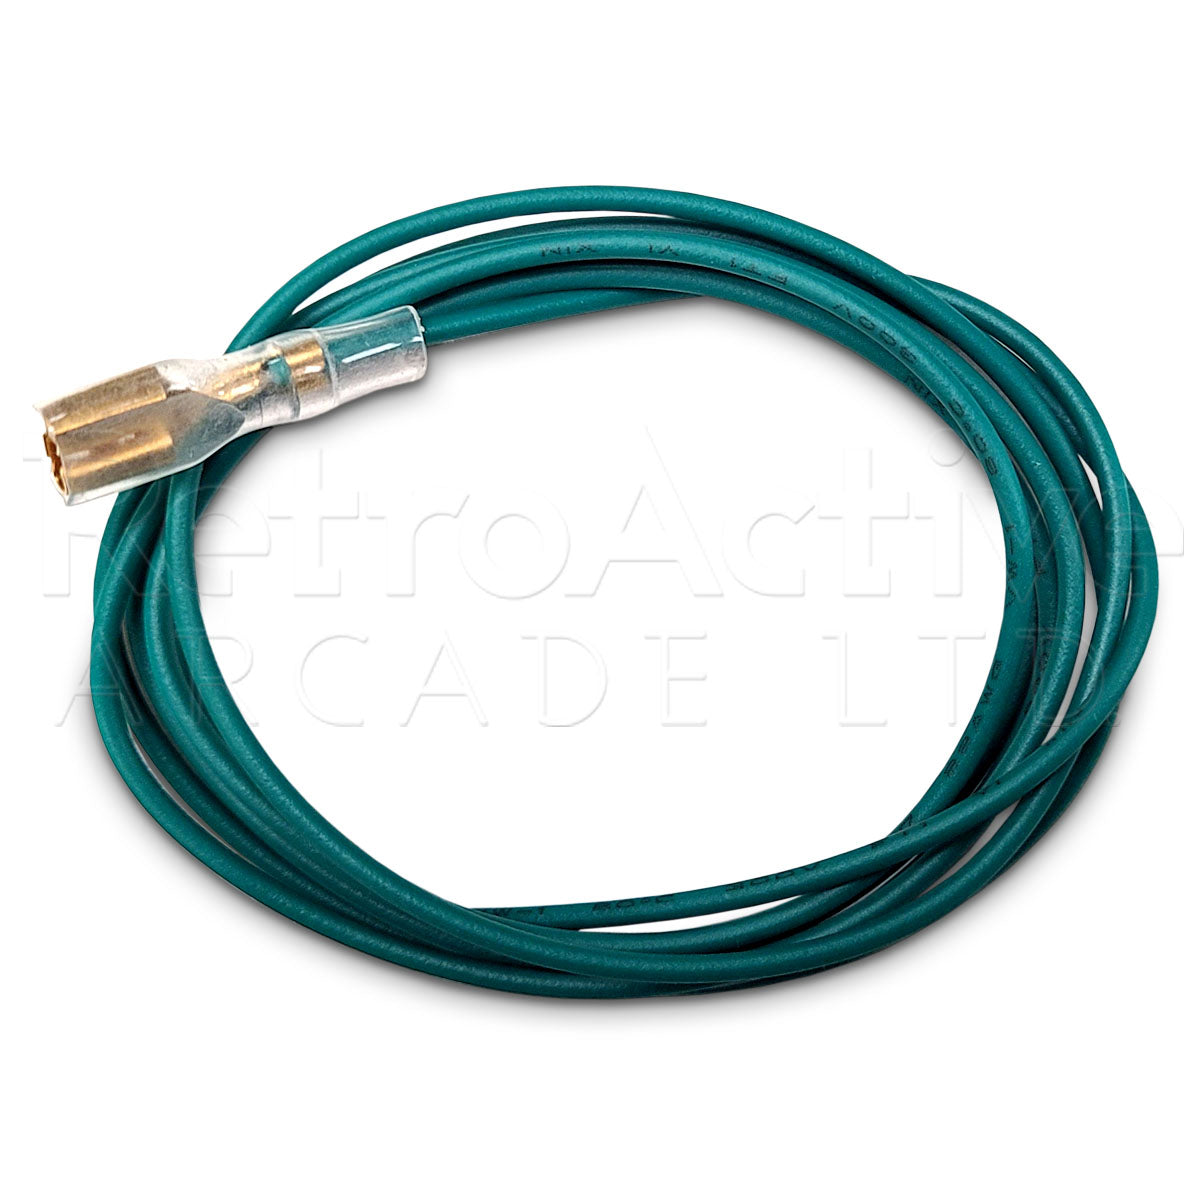 1 Meter Wire with .110" Connector - Green Wiring & Harnesses Universal - Retro Active Arcade